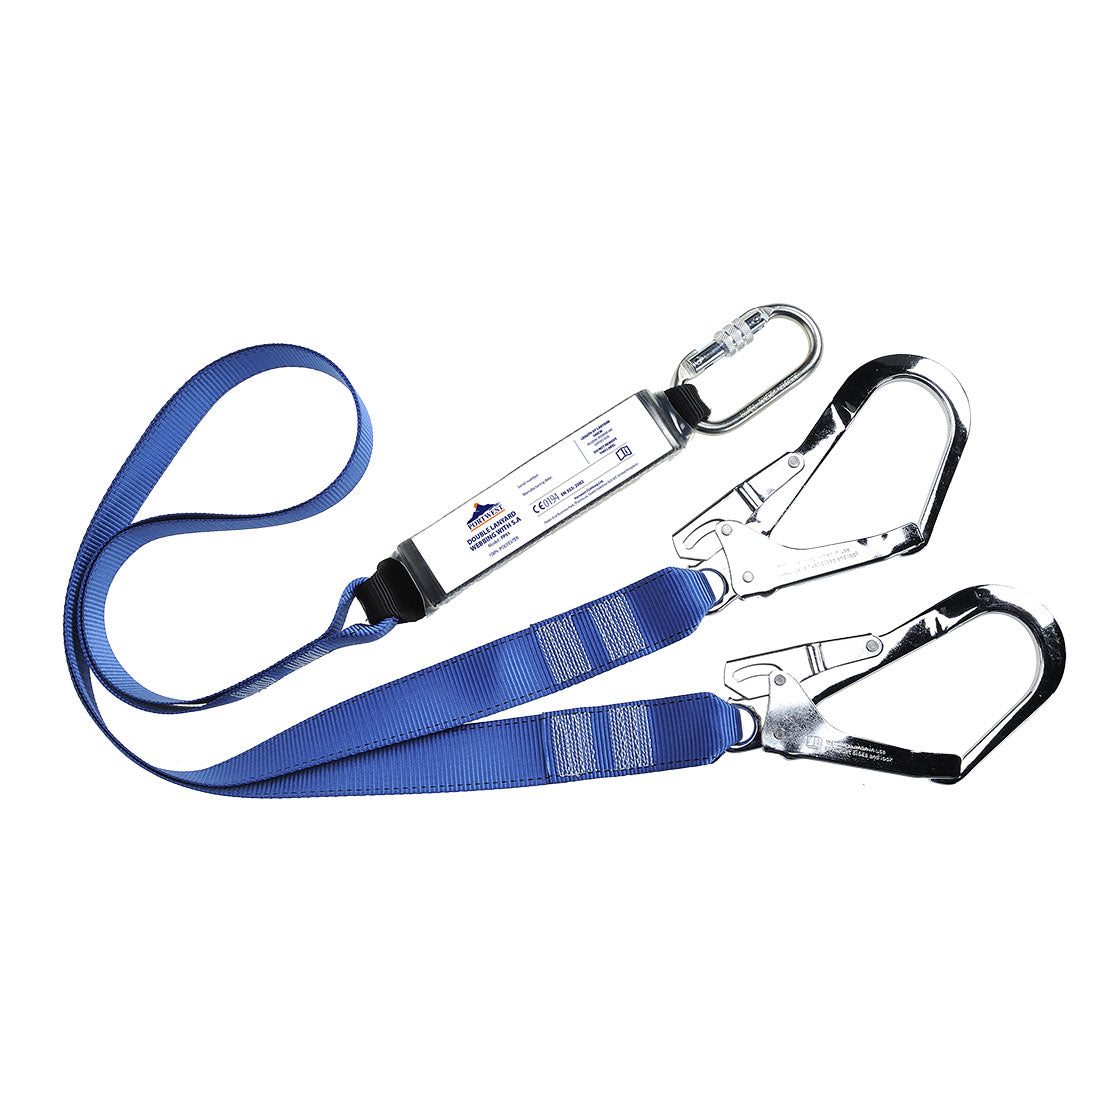 Double Webbing 1.8m Lanyard With Shock Absorber  (FP51)